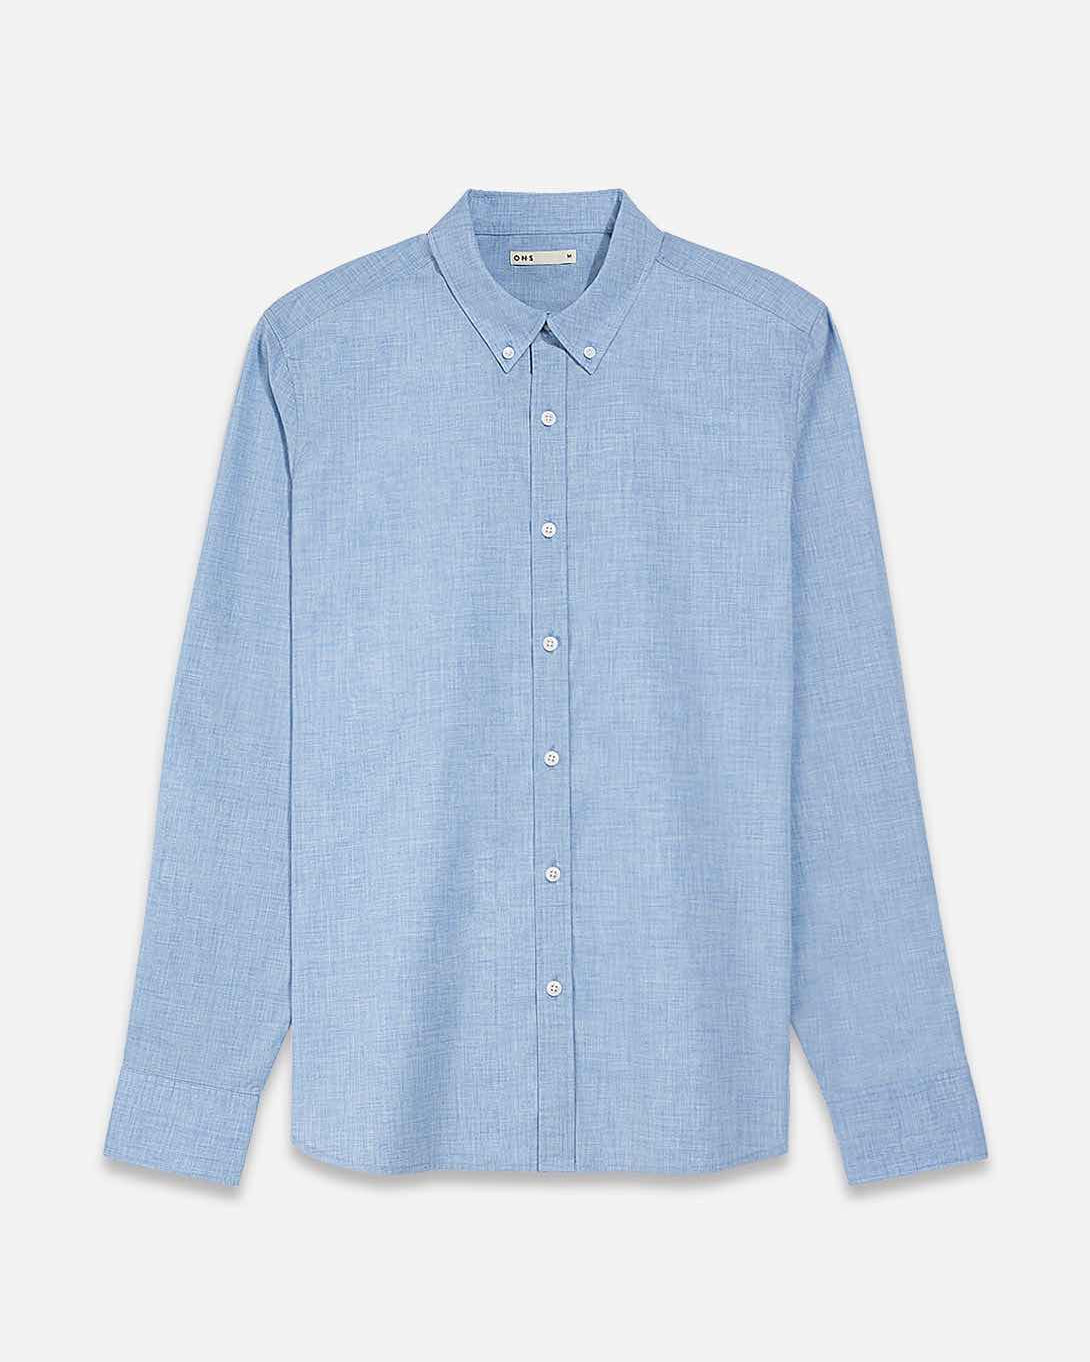 Eventide Fulton Shirt ONS Clothing Menswear NYC SS22 Spring/summer 22